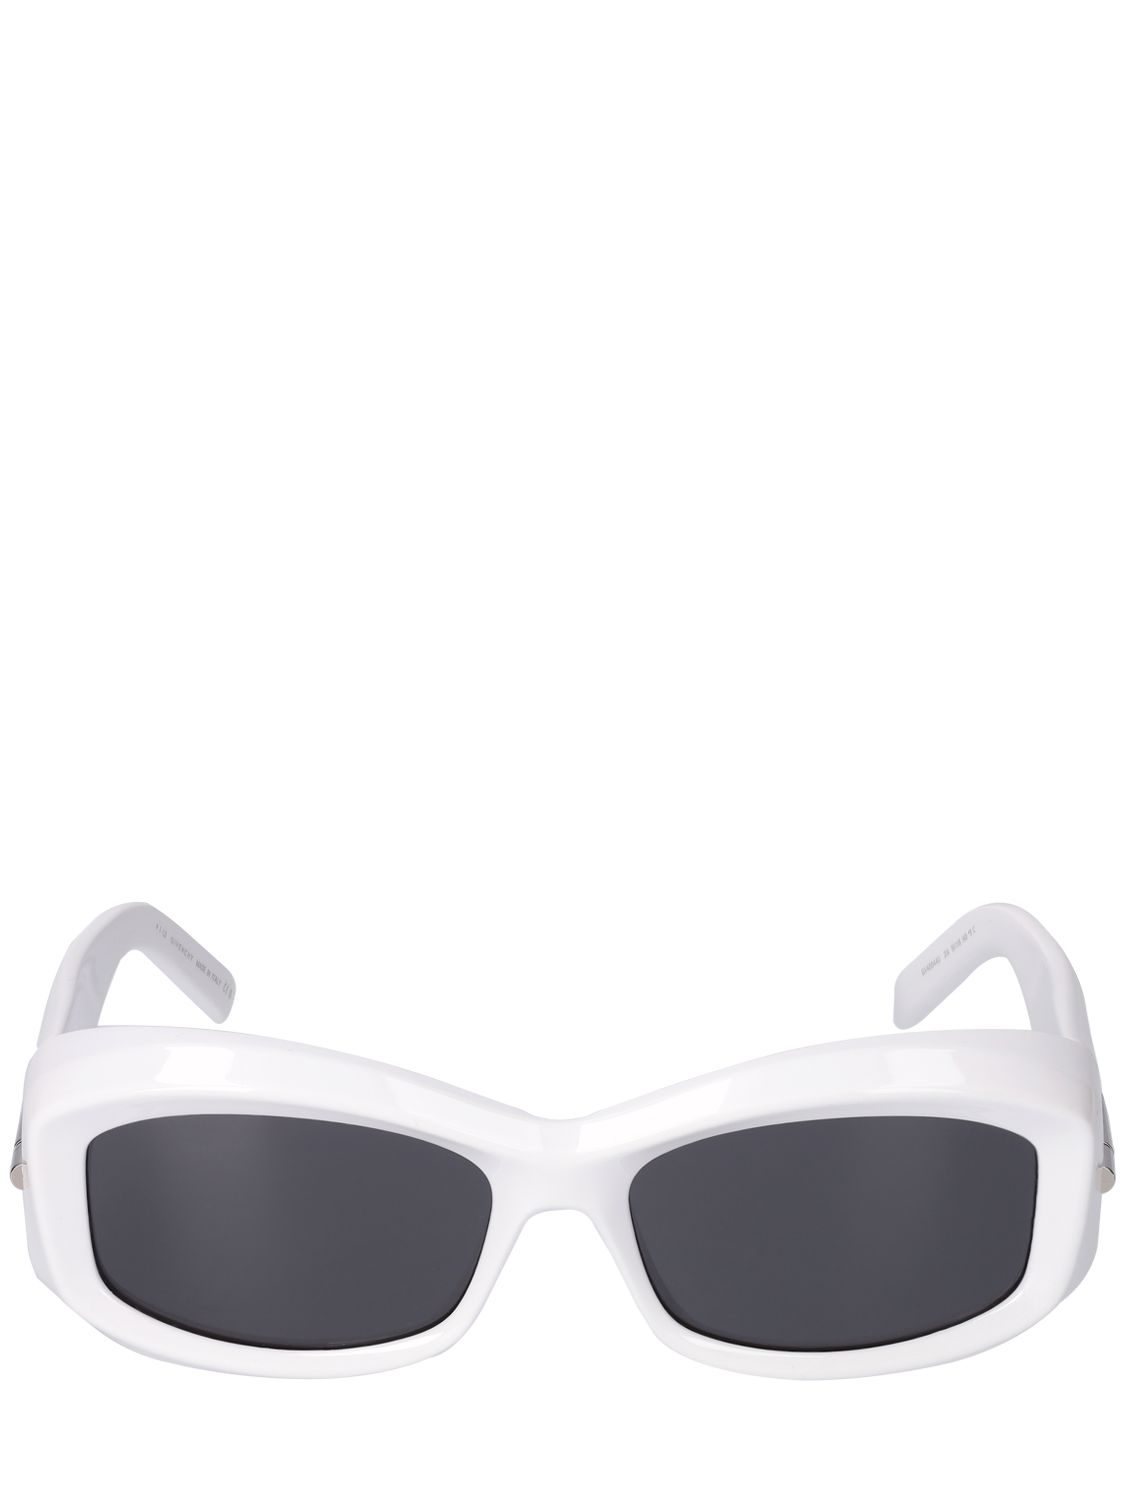 Givenchy G180 Geometric Sunglasses In White